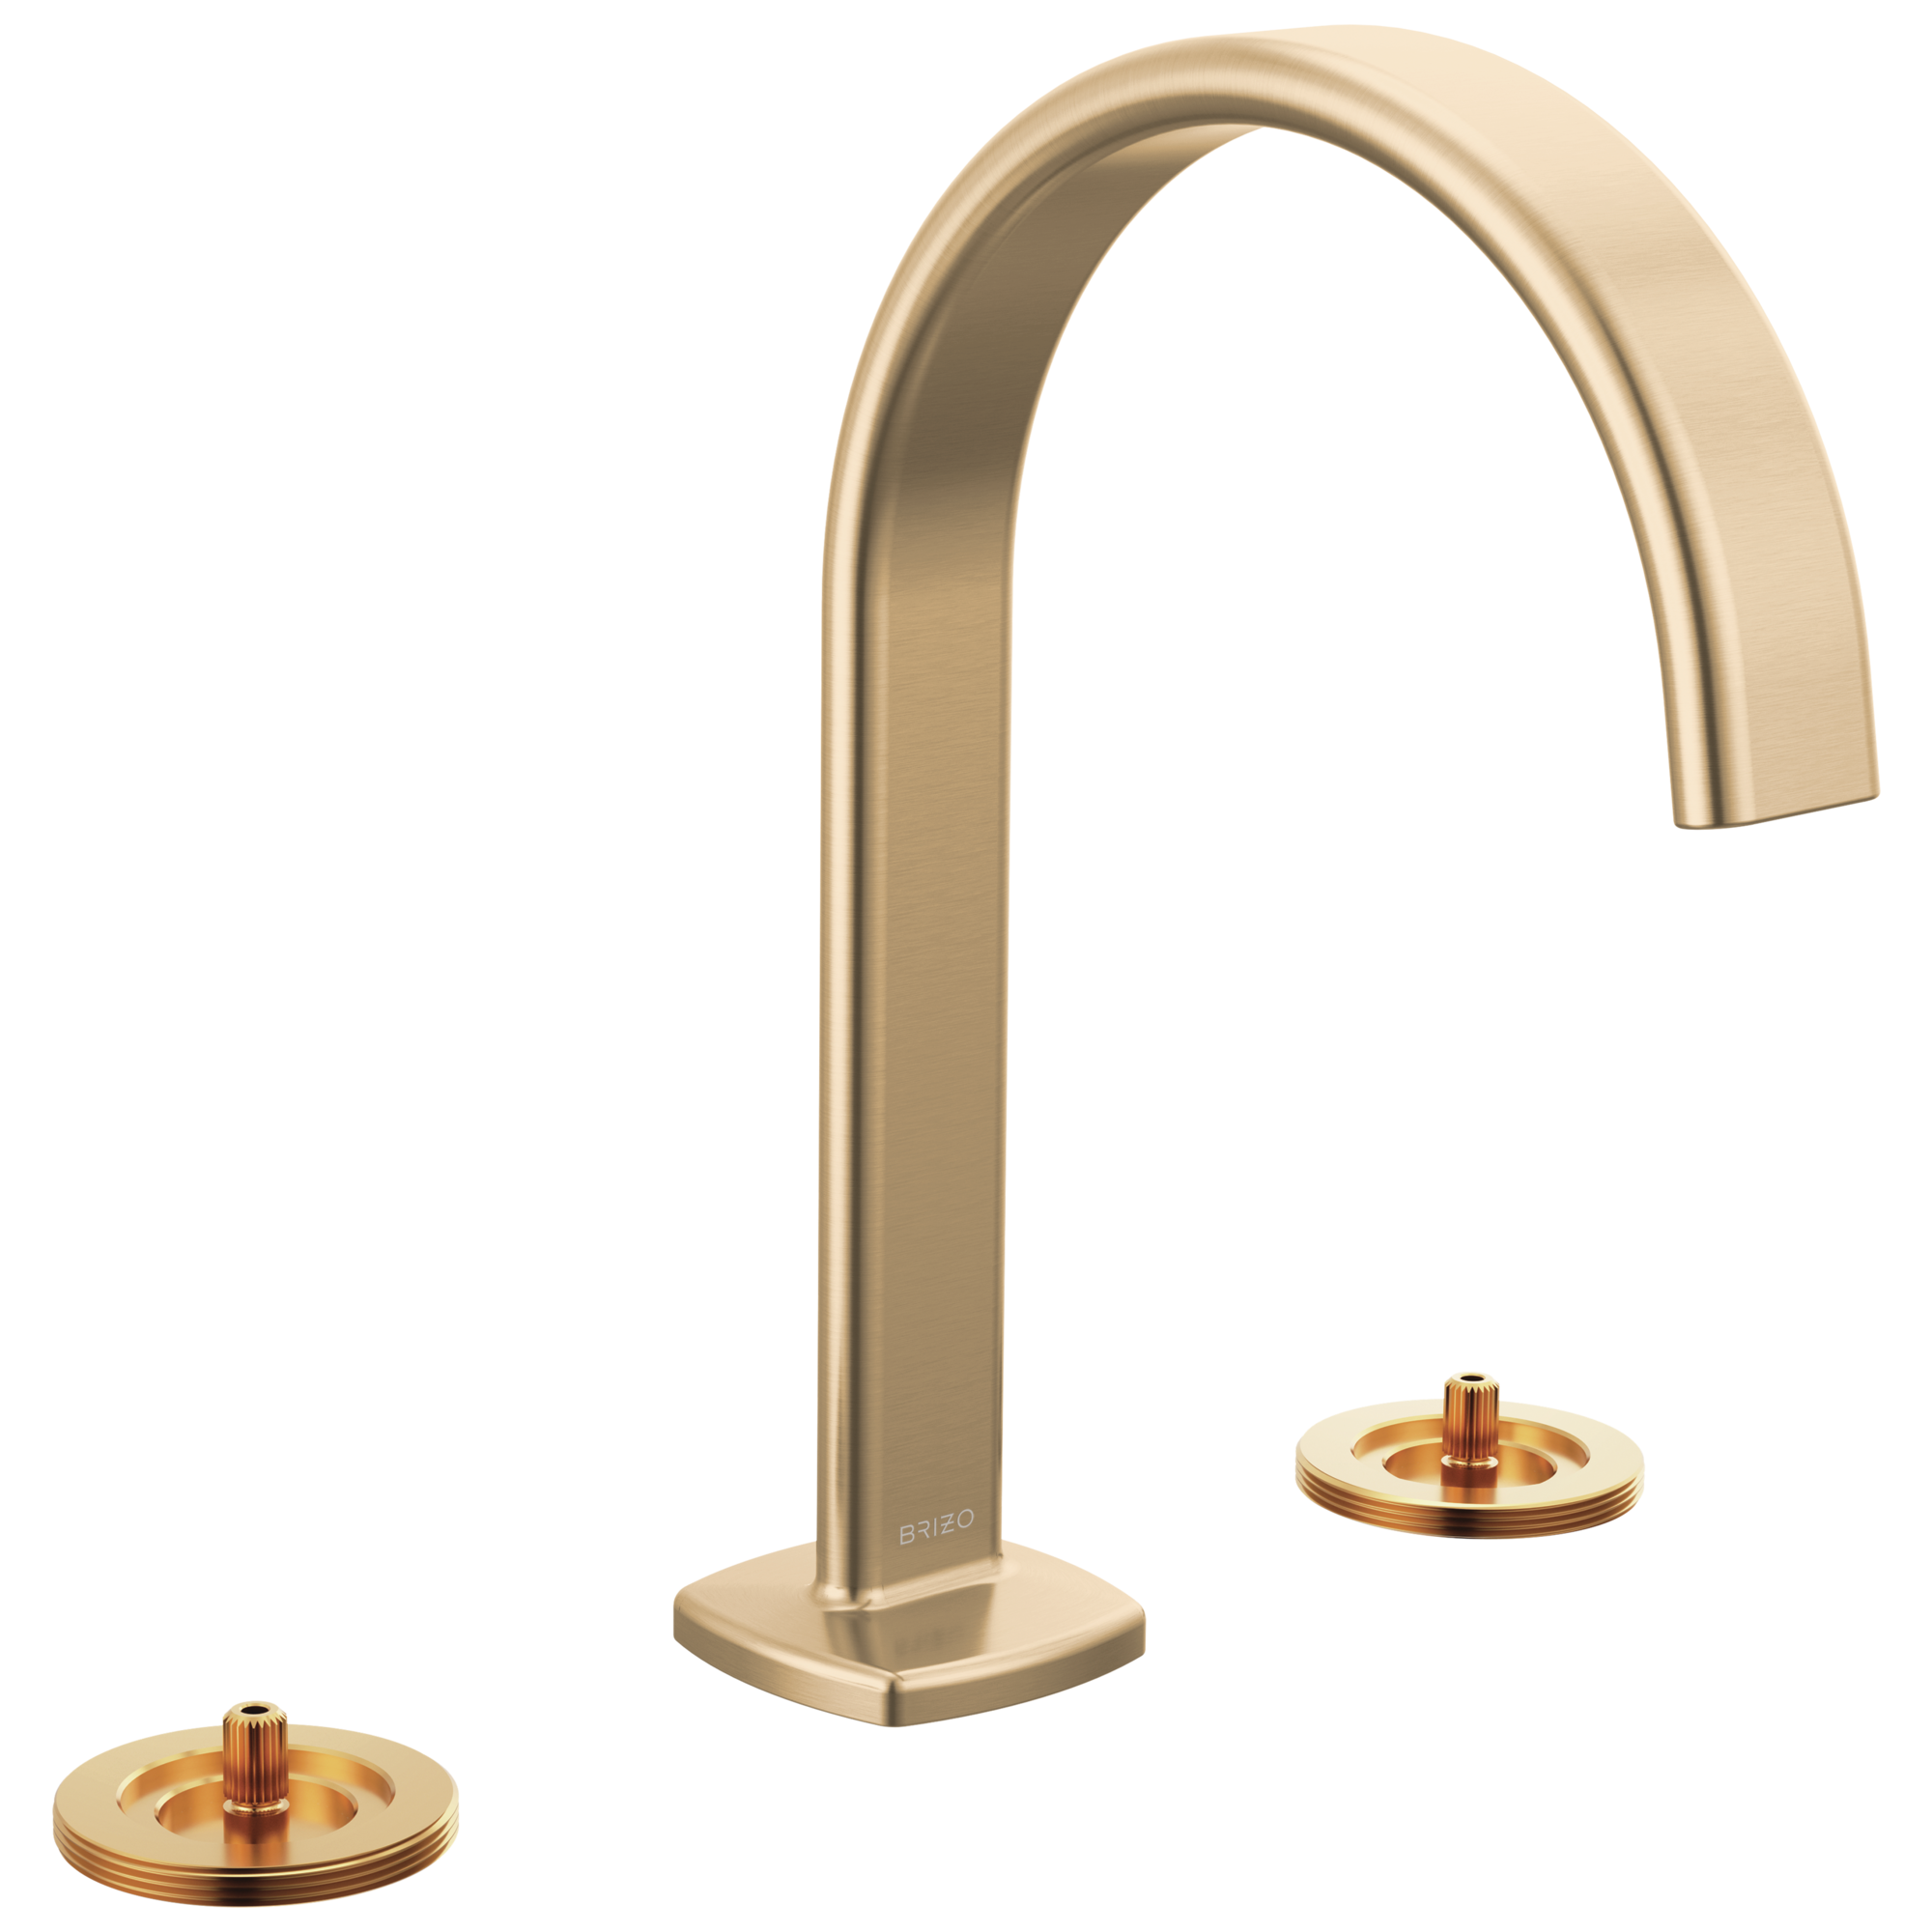 Brizo Allaria Widespread Lavatory Faucet with Arc Spout - Less Handles